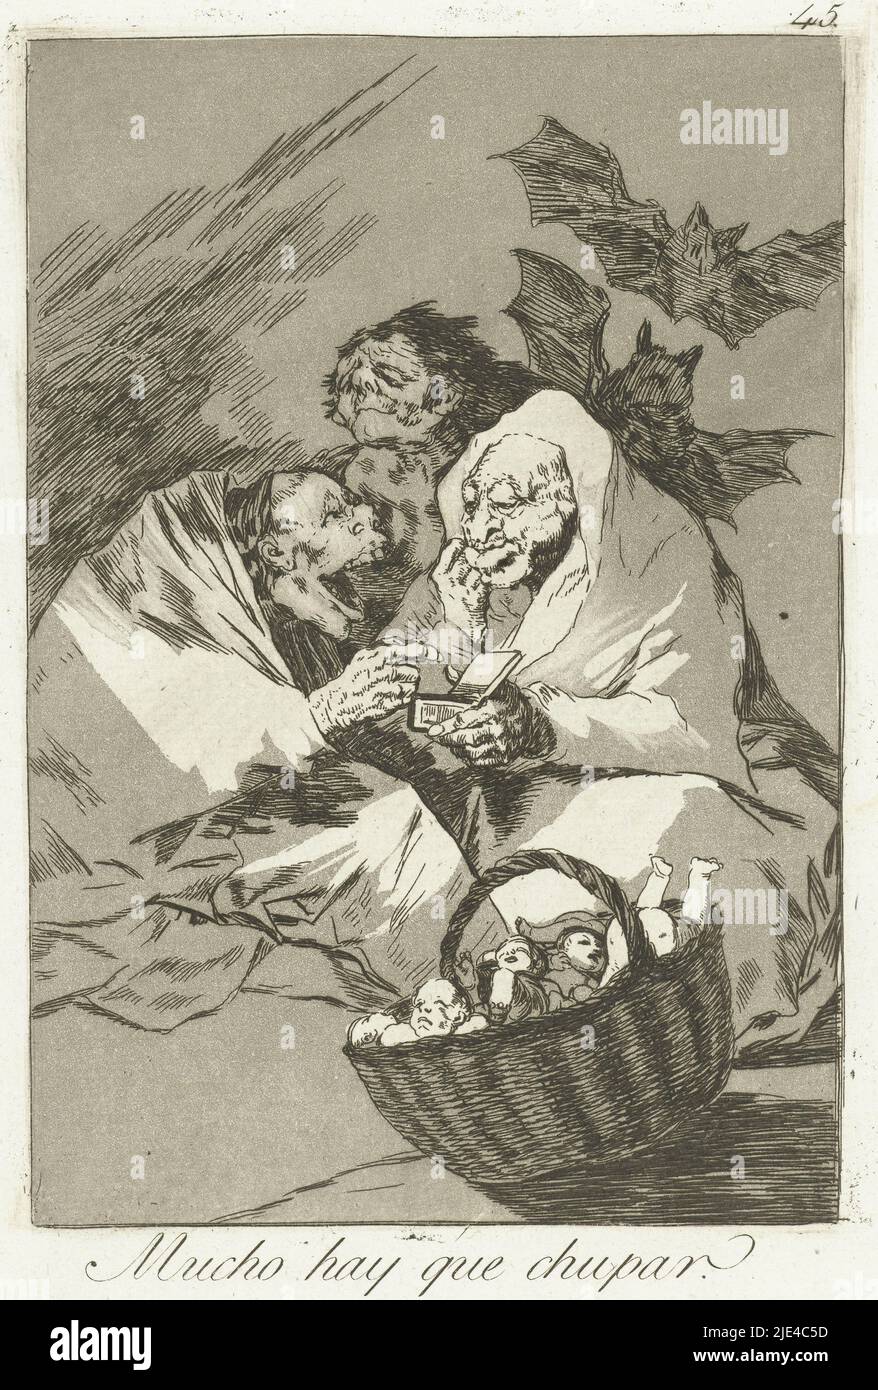 There is plenty to suck out, Francisco de Goya, 1797 - 1799, Three witches or monstrous figures, one has a box in his hand. From behind, two bats approach; in the foreground is a basket filled with babies. Forty-fifth print in the Los Caprichos series., print maker: Francisco de Goya, Francisco de Goya, Spain, 1797 - 1799, paper, etching, h 205 mm × w 150 mm Stock Photo